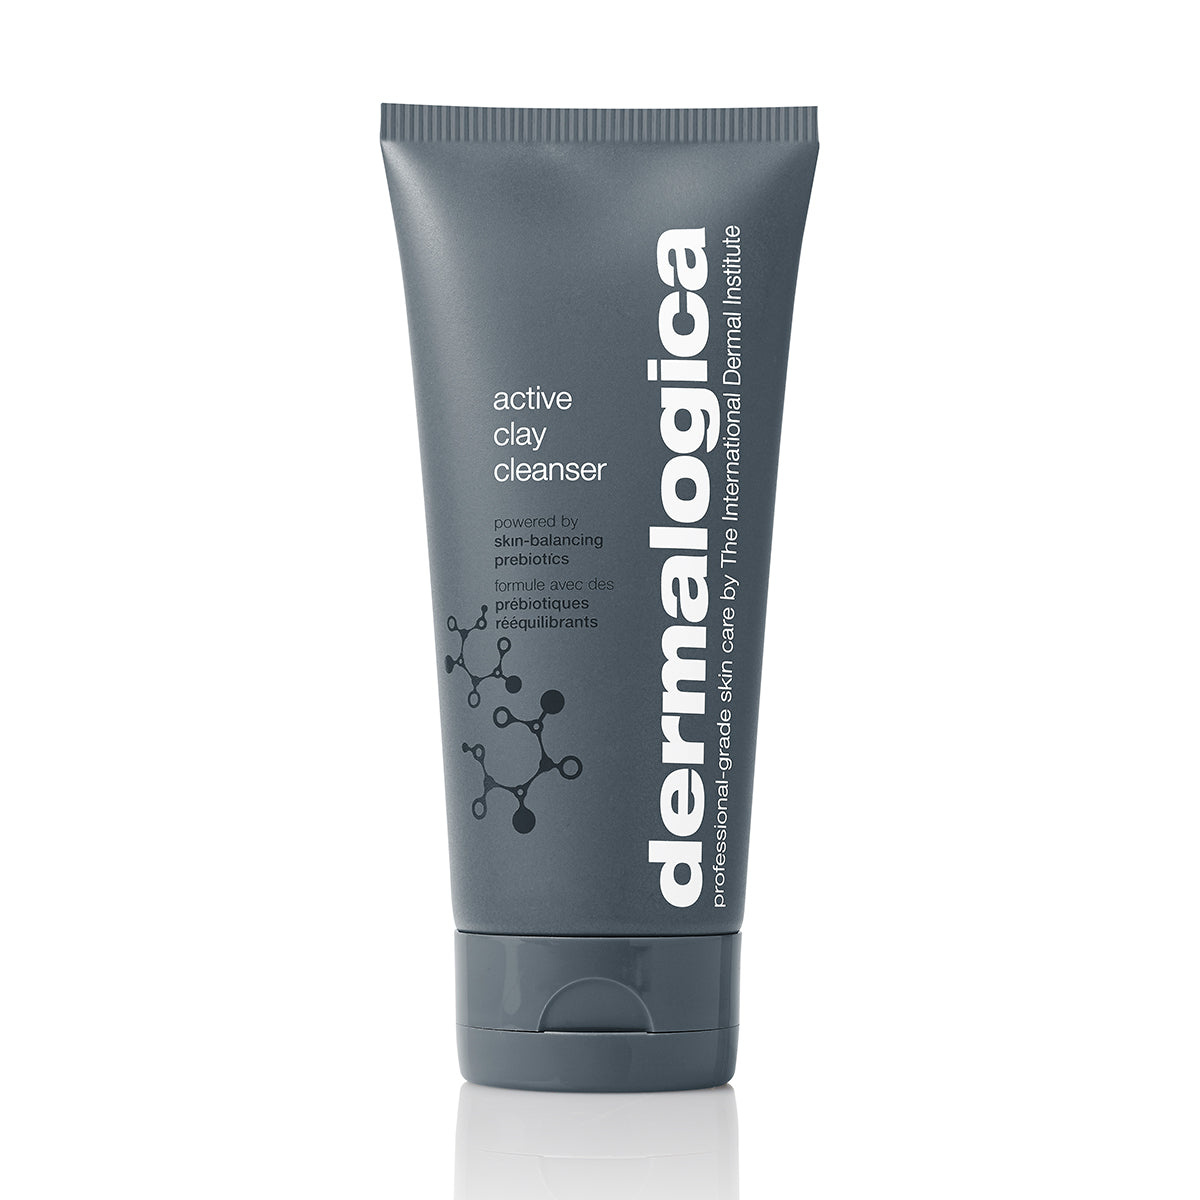 Dermalogica Active Clay Cleanser 150ml - Emerald Beauty & SpaDermalogica Active Clay Cleanser 150ml - Emerald Beauty & Spa